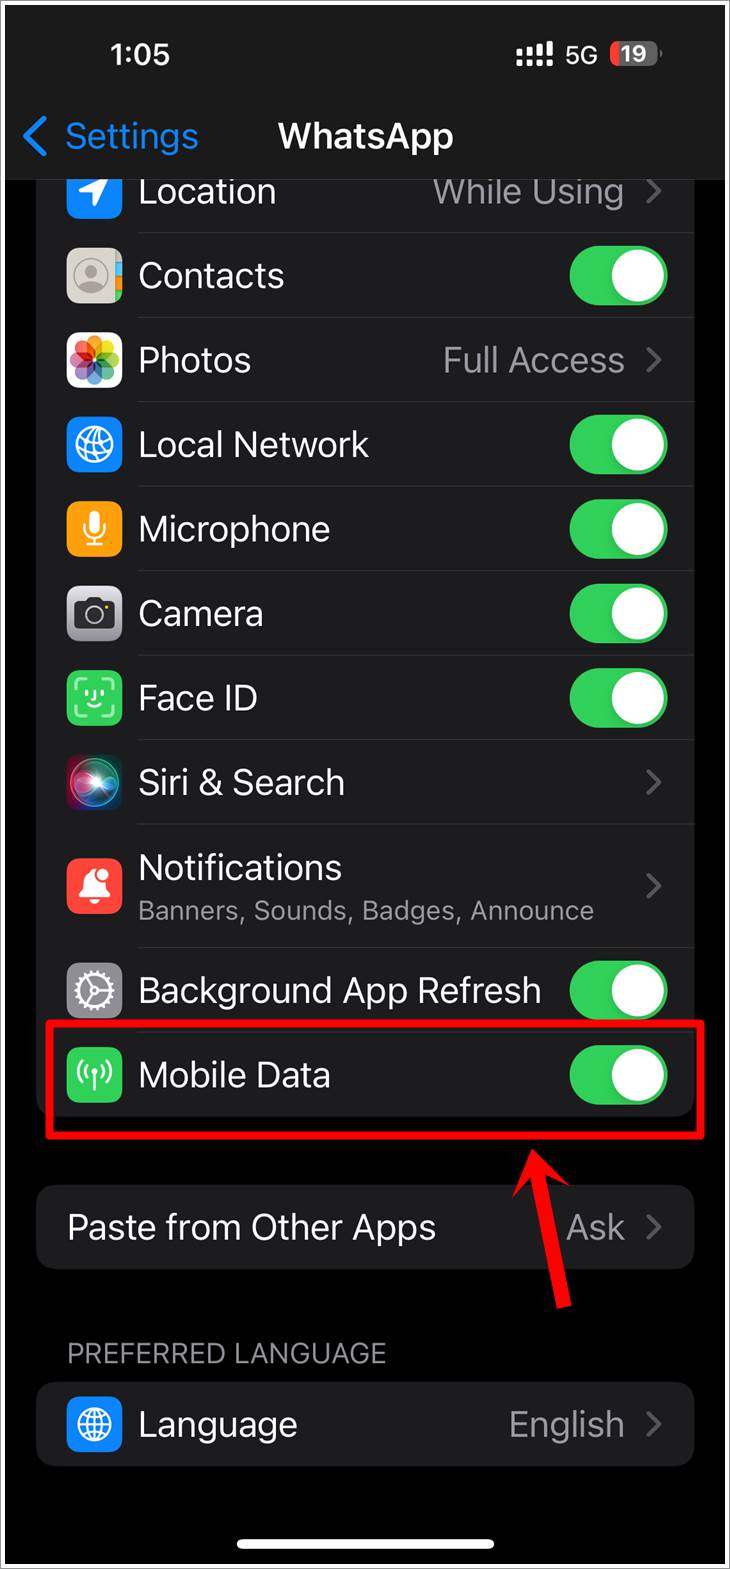 Fix WhatsApp Not Receiving Messages: This is a screenshot of the iPhone 'Settings' for WhatsApp. The 'Mobile Data' option has been toggled on and highlighted.